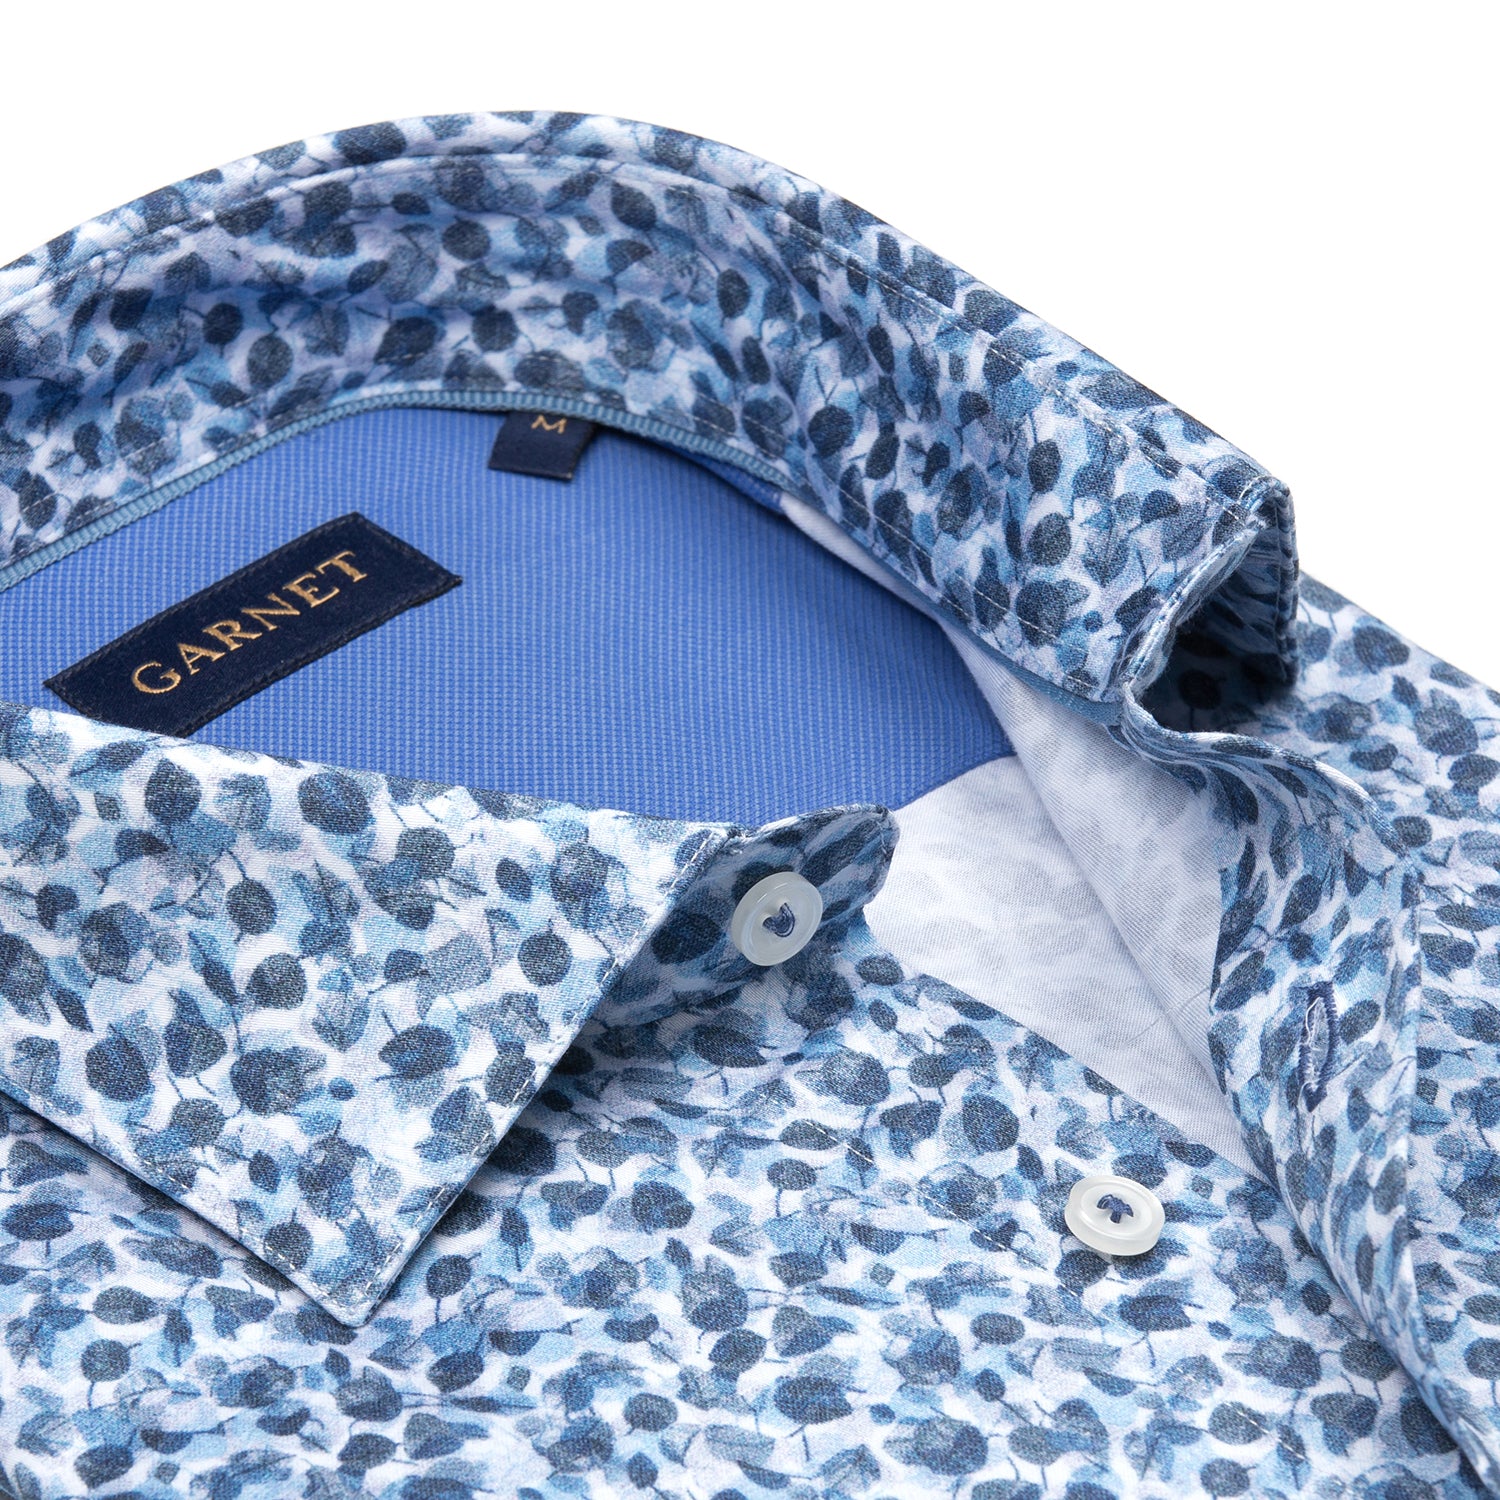 Blue Floral Printed Long Sleeve Cotton Shirt